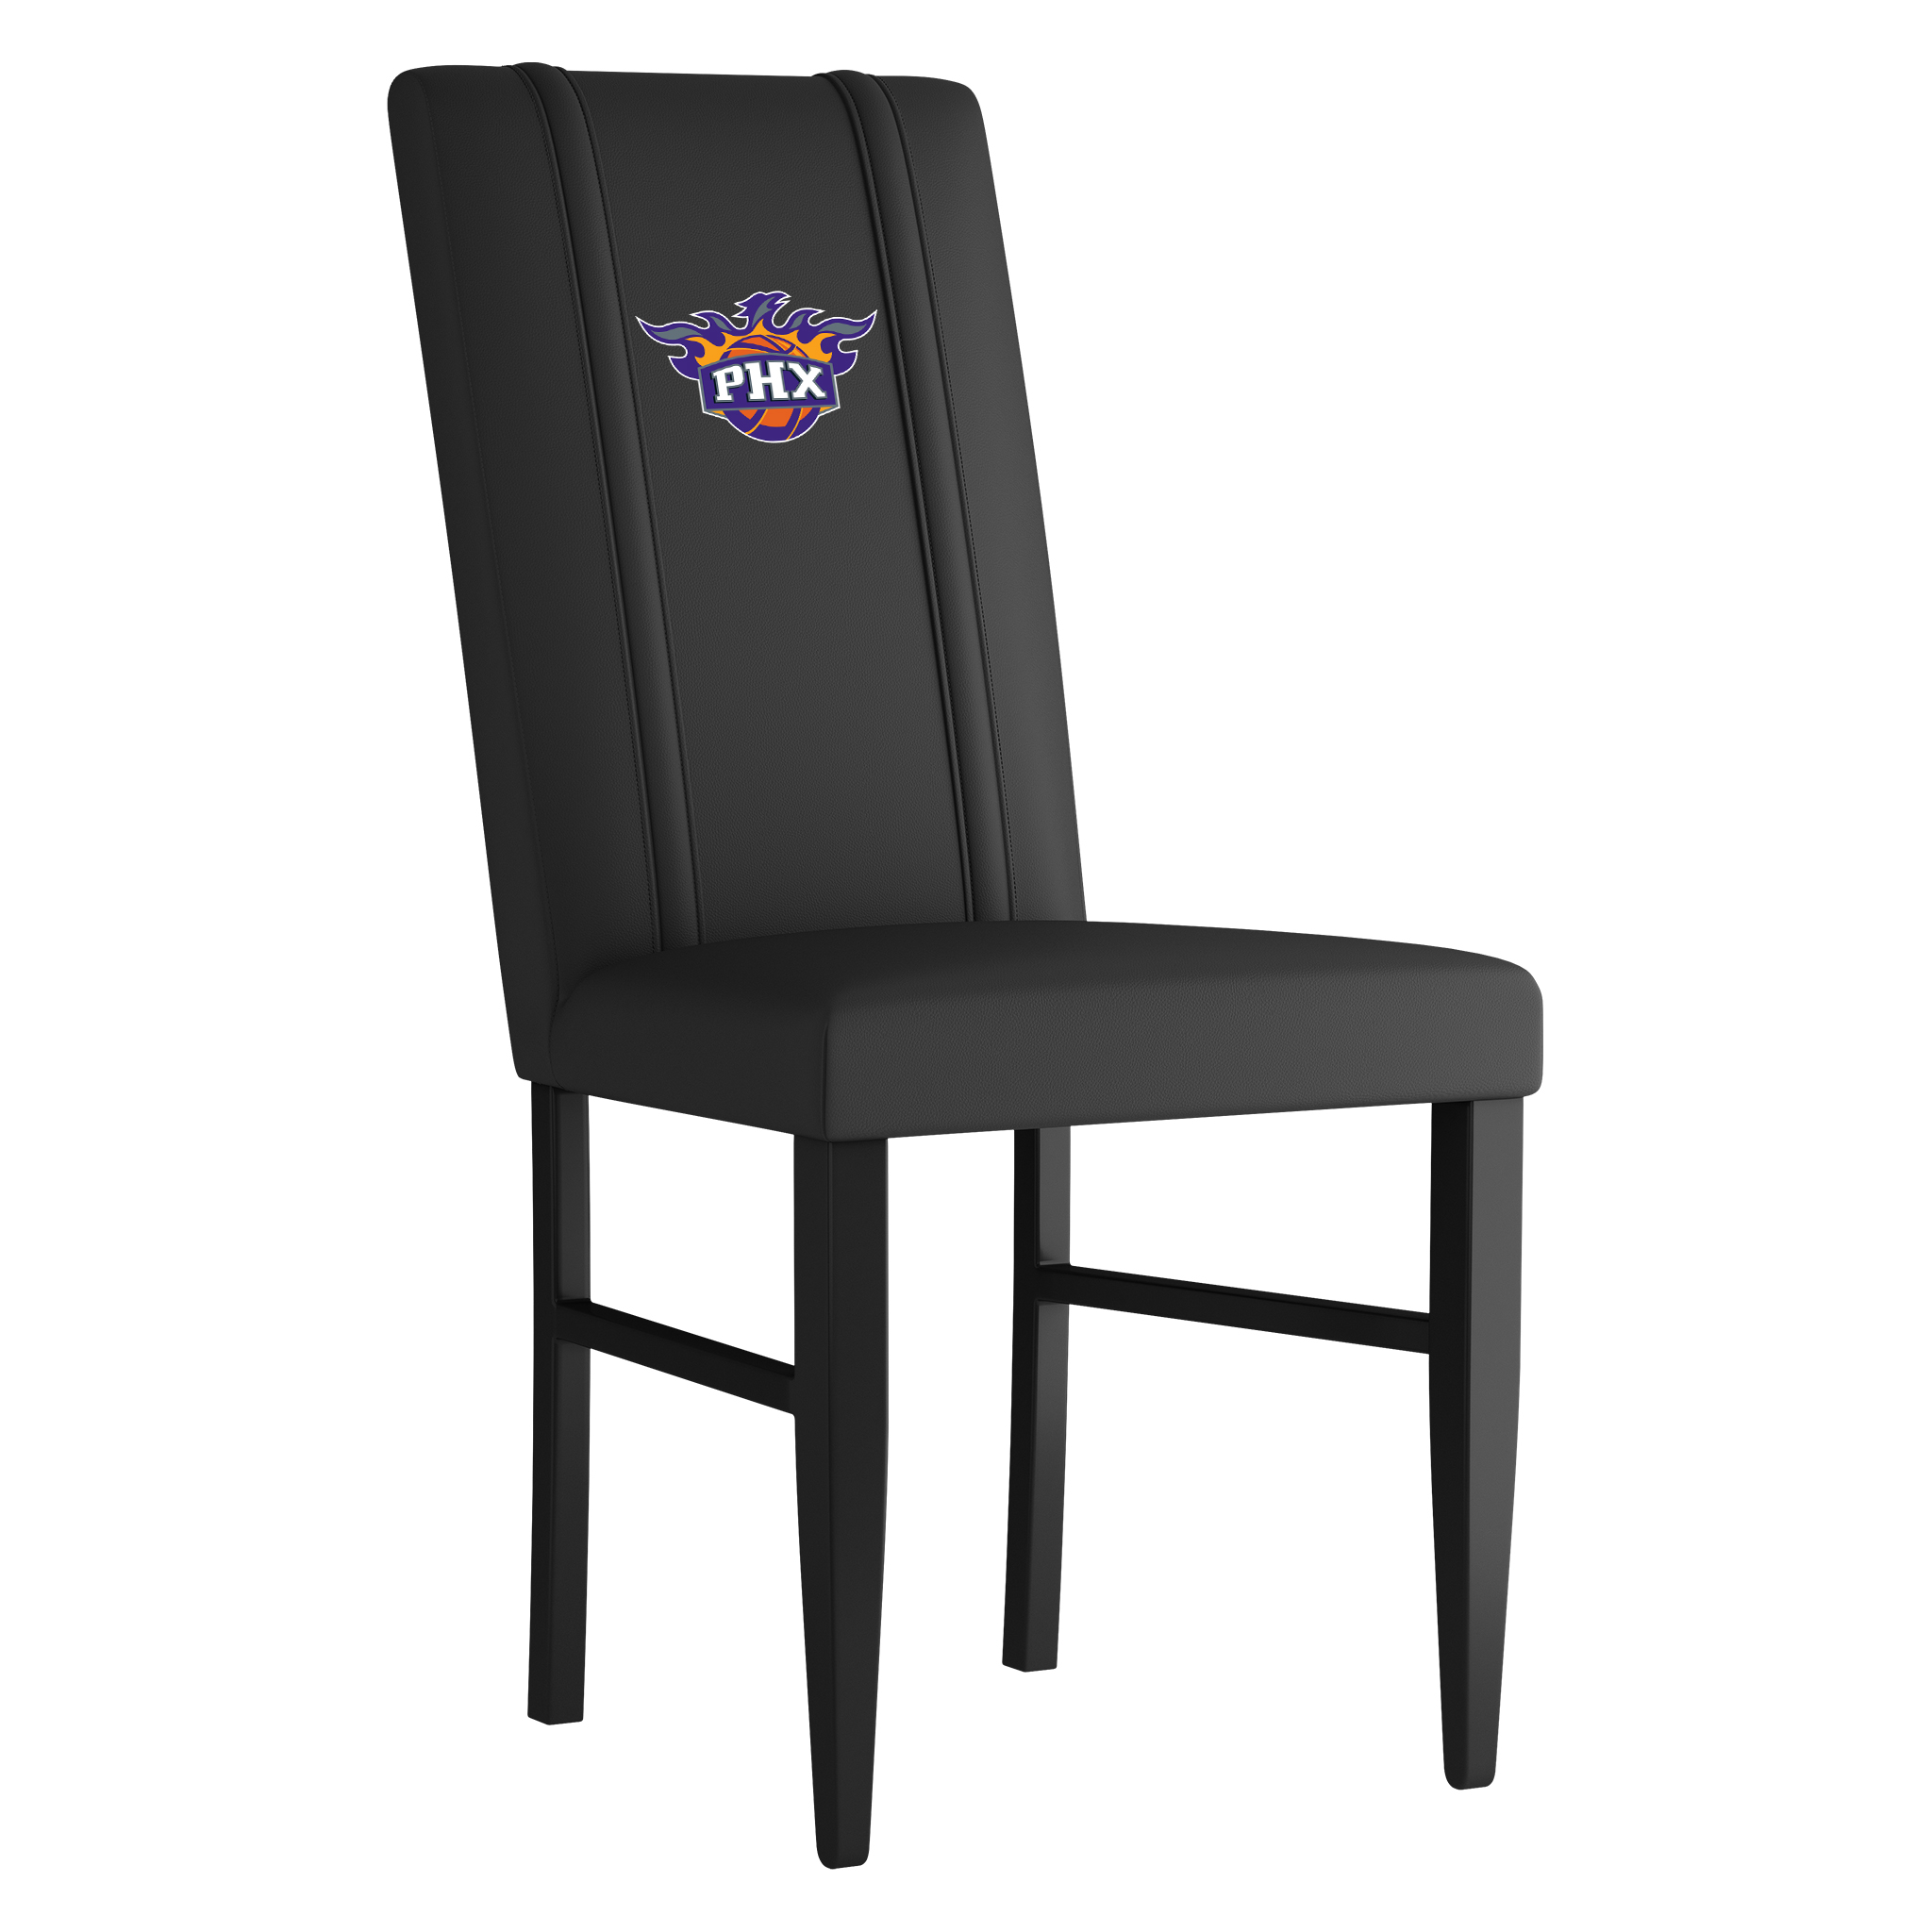 Phoenix Suns Side Chair 2000 With Phoenix Suns Secondary